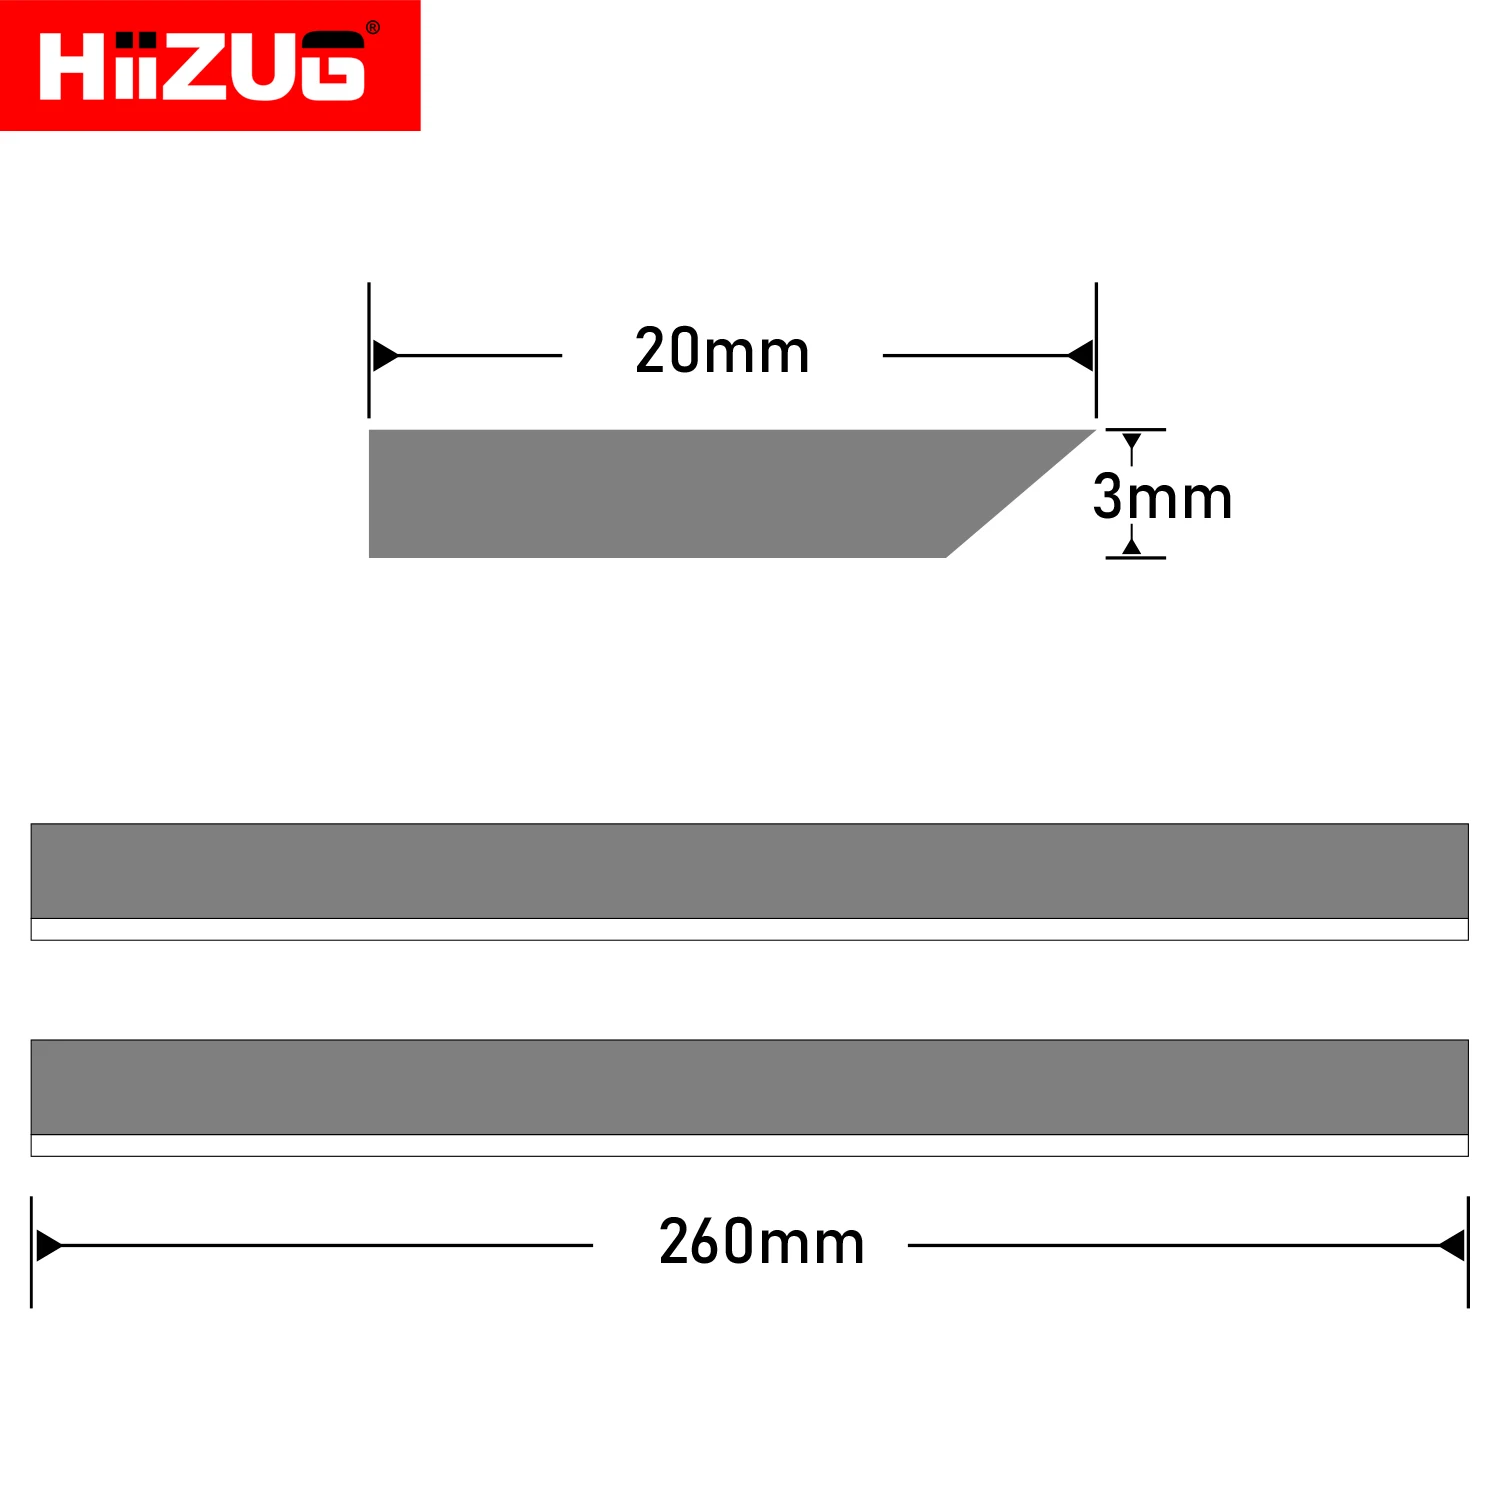 Metabo Planer Blades Knives Jointer 260mm for HC260C HC260M HC260K Surface Planer Thicknesser Cutter Head  Set of 2 Pieces